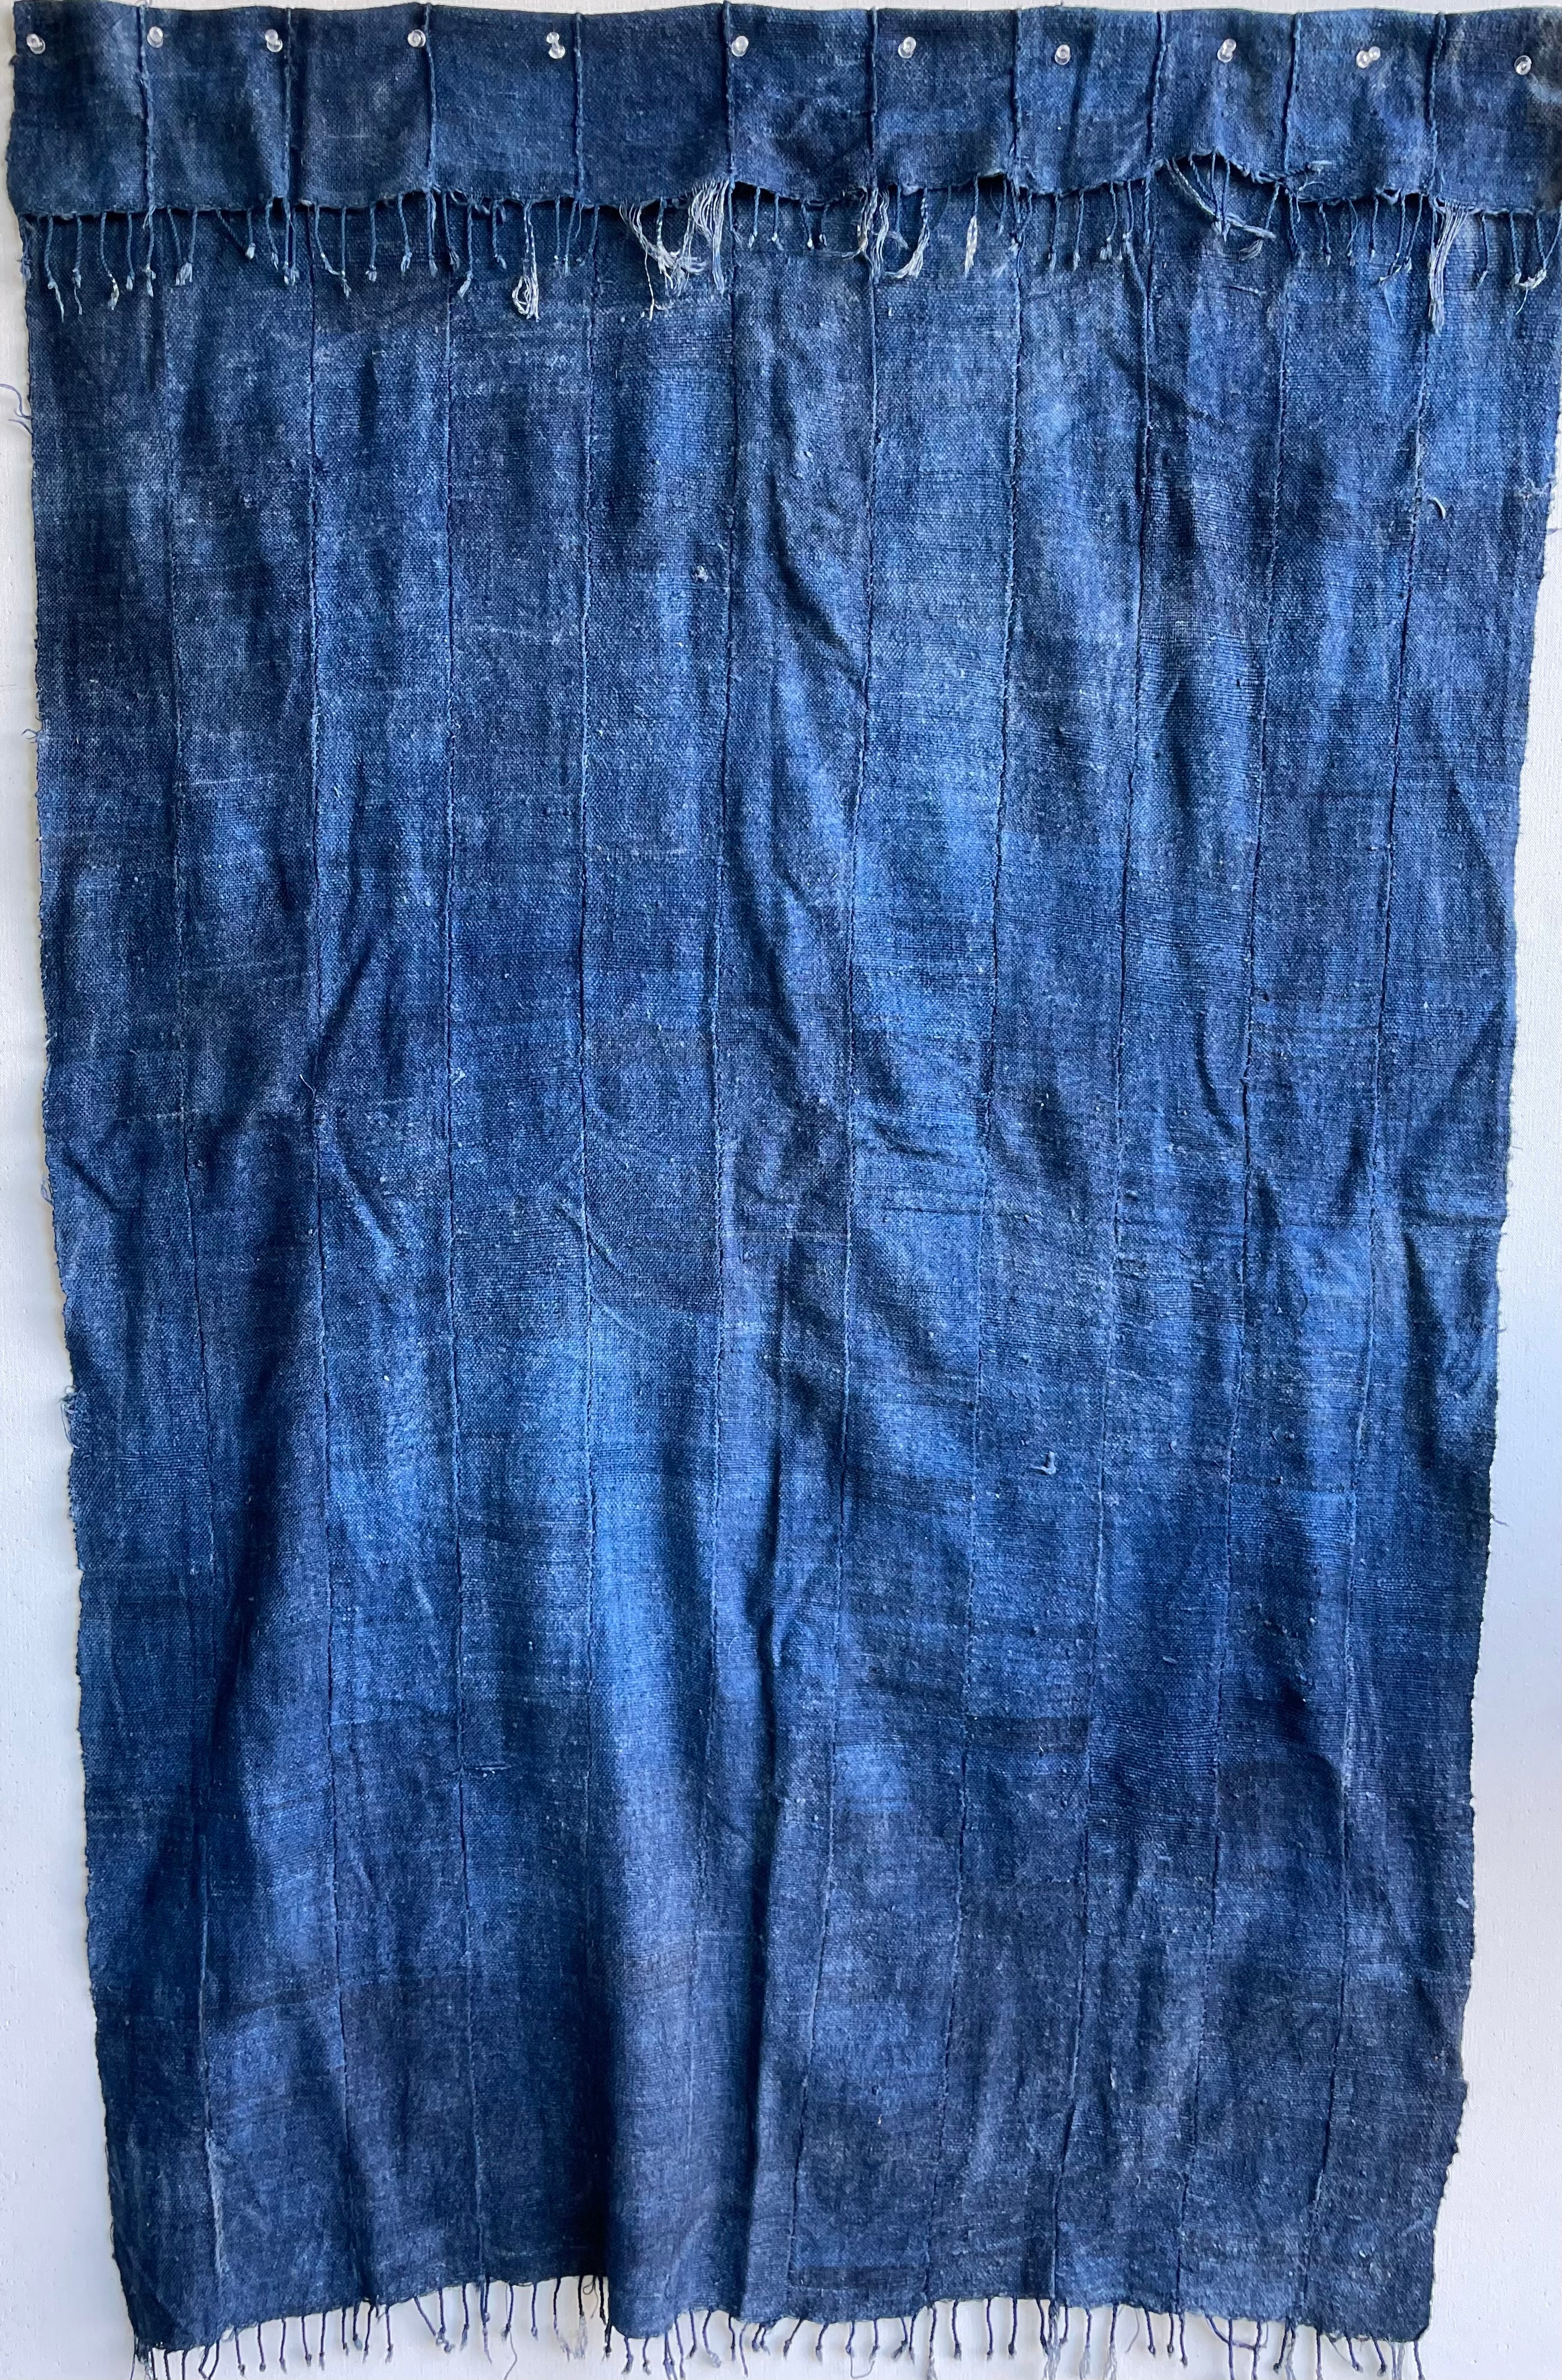 Handcrafted Textiles - Handmade - Vintage -  African Art - West - Home Decor - Living Room - Indigo Dyed  - Cotton - Dogon Mali - Solid Blue